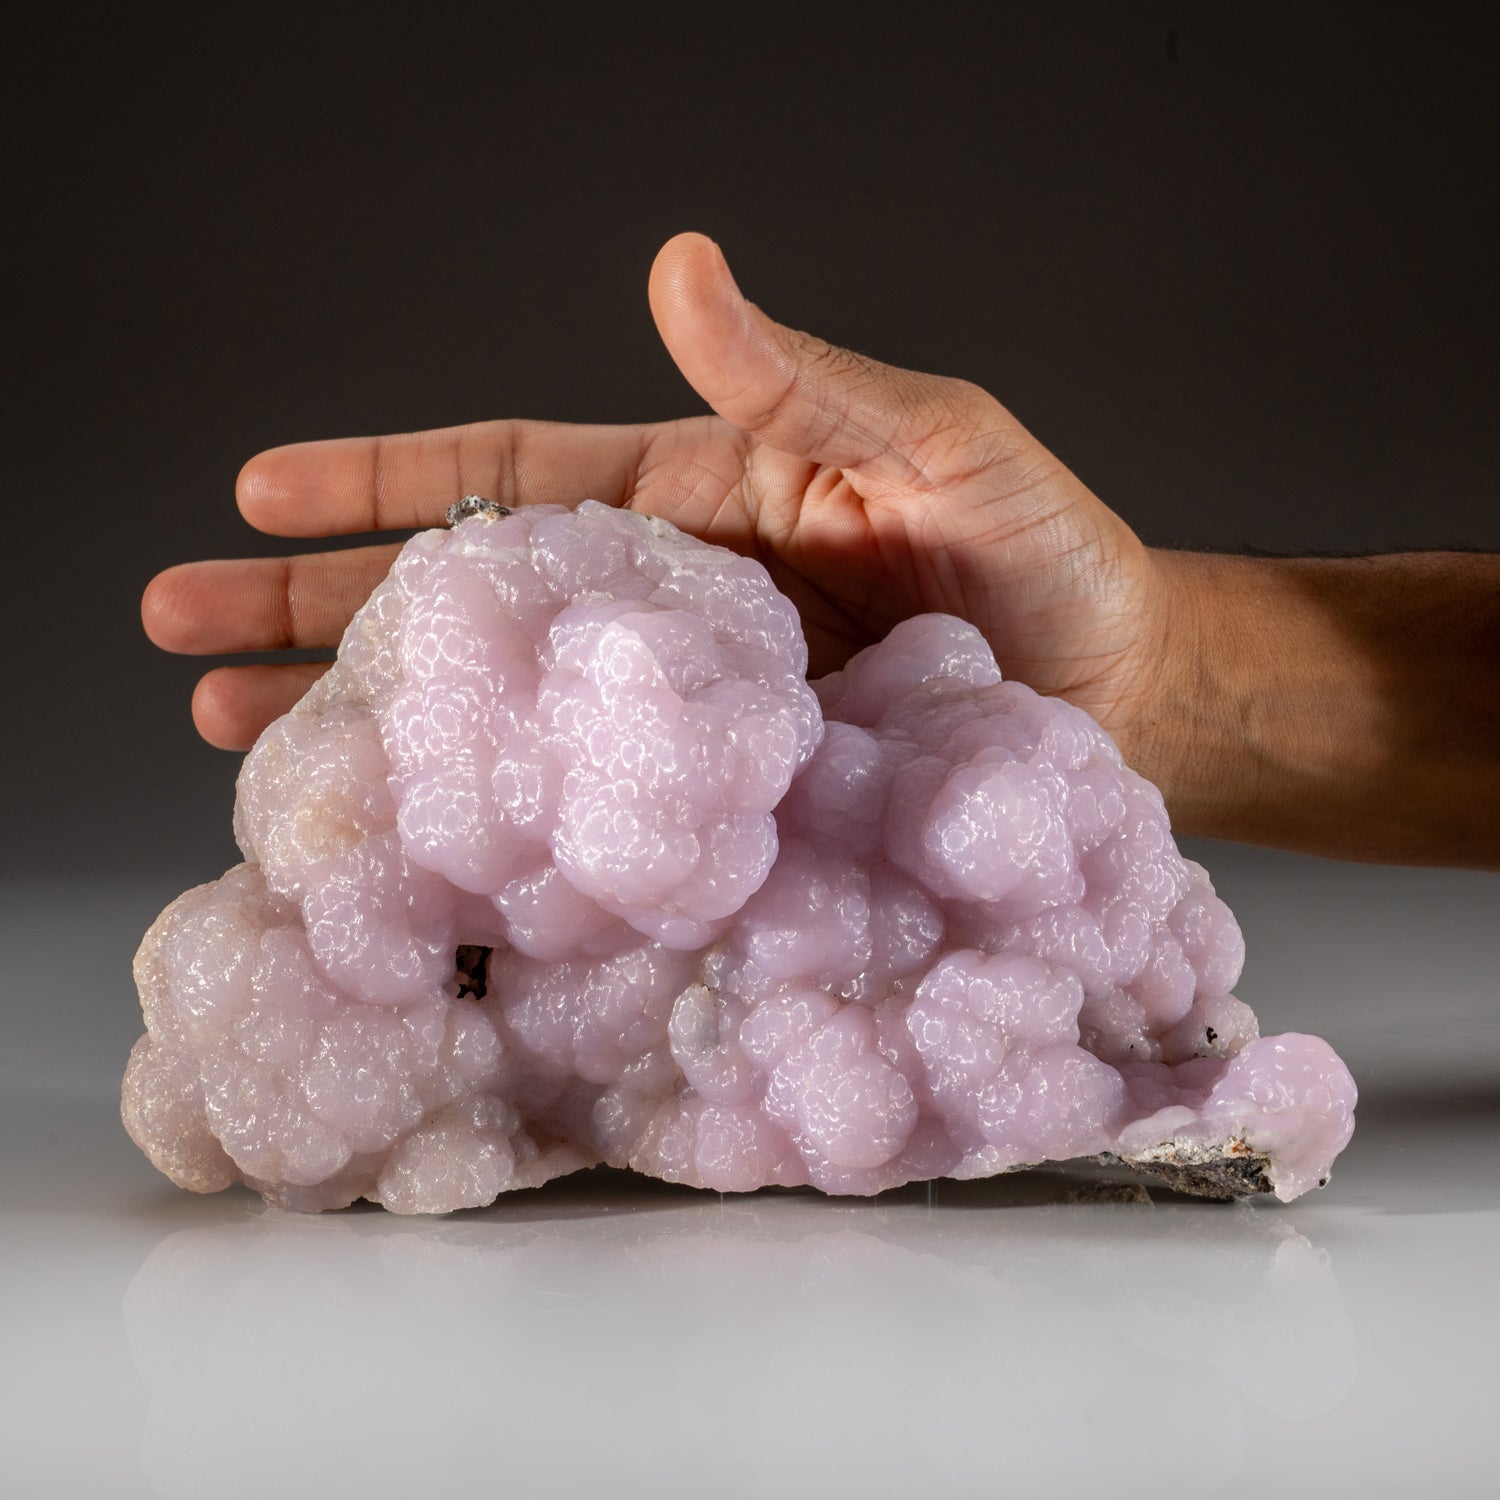 Pink Smithsonite from Kelly Mine, Magdalena District, Socorro County, New Mexico, USA